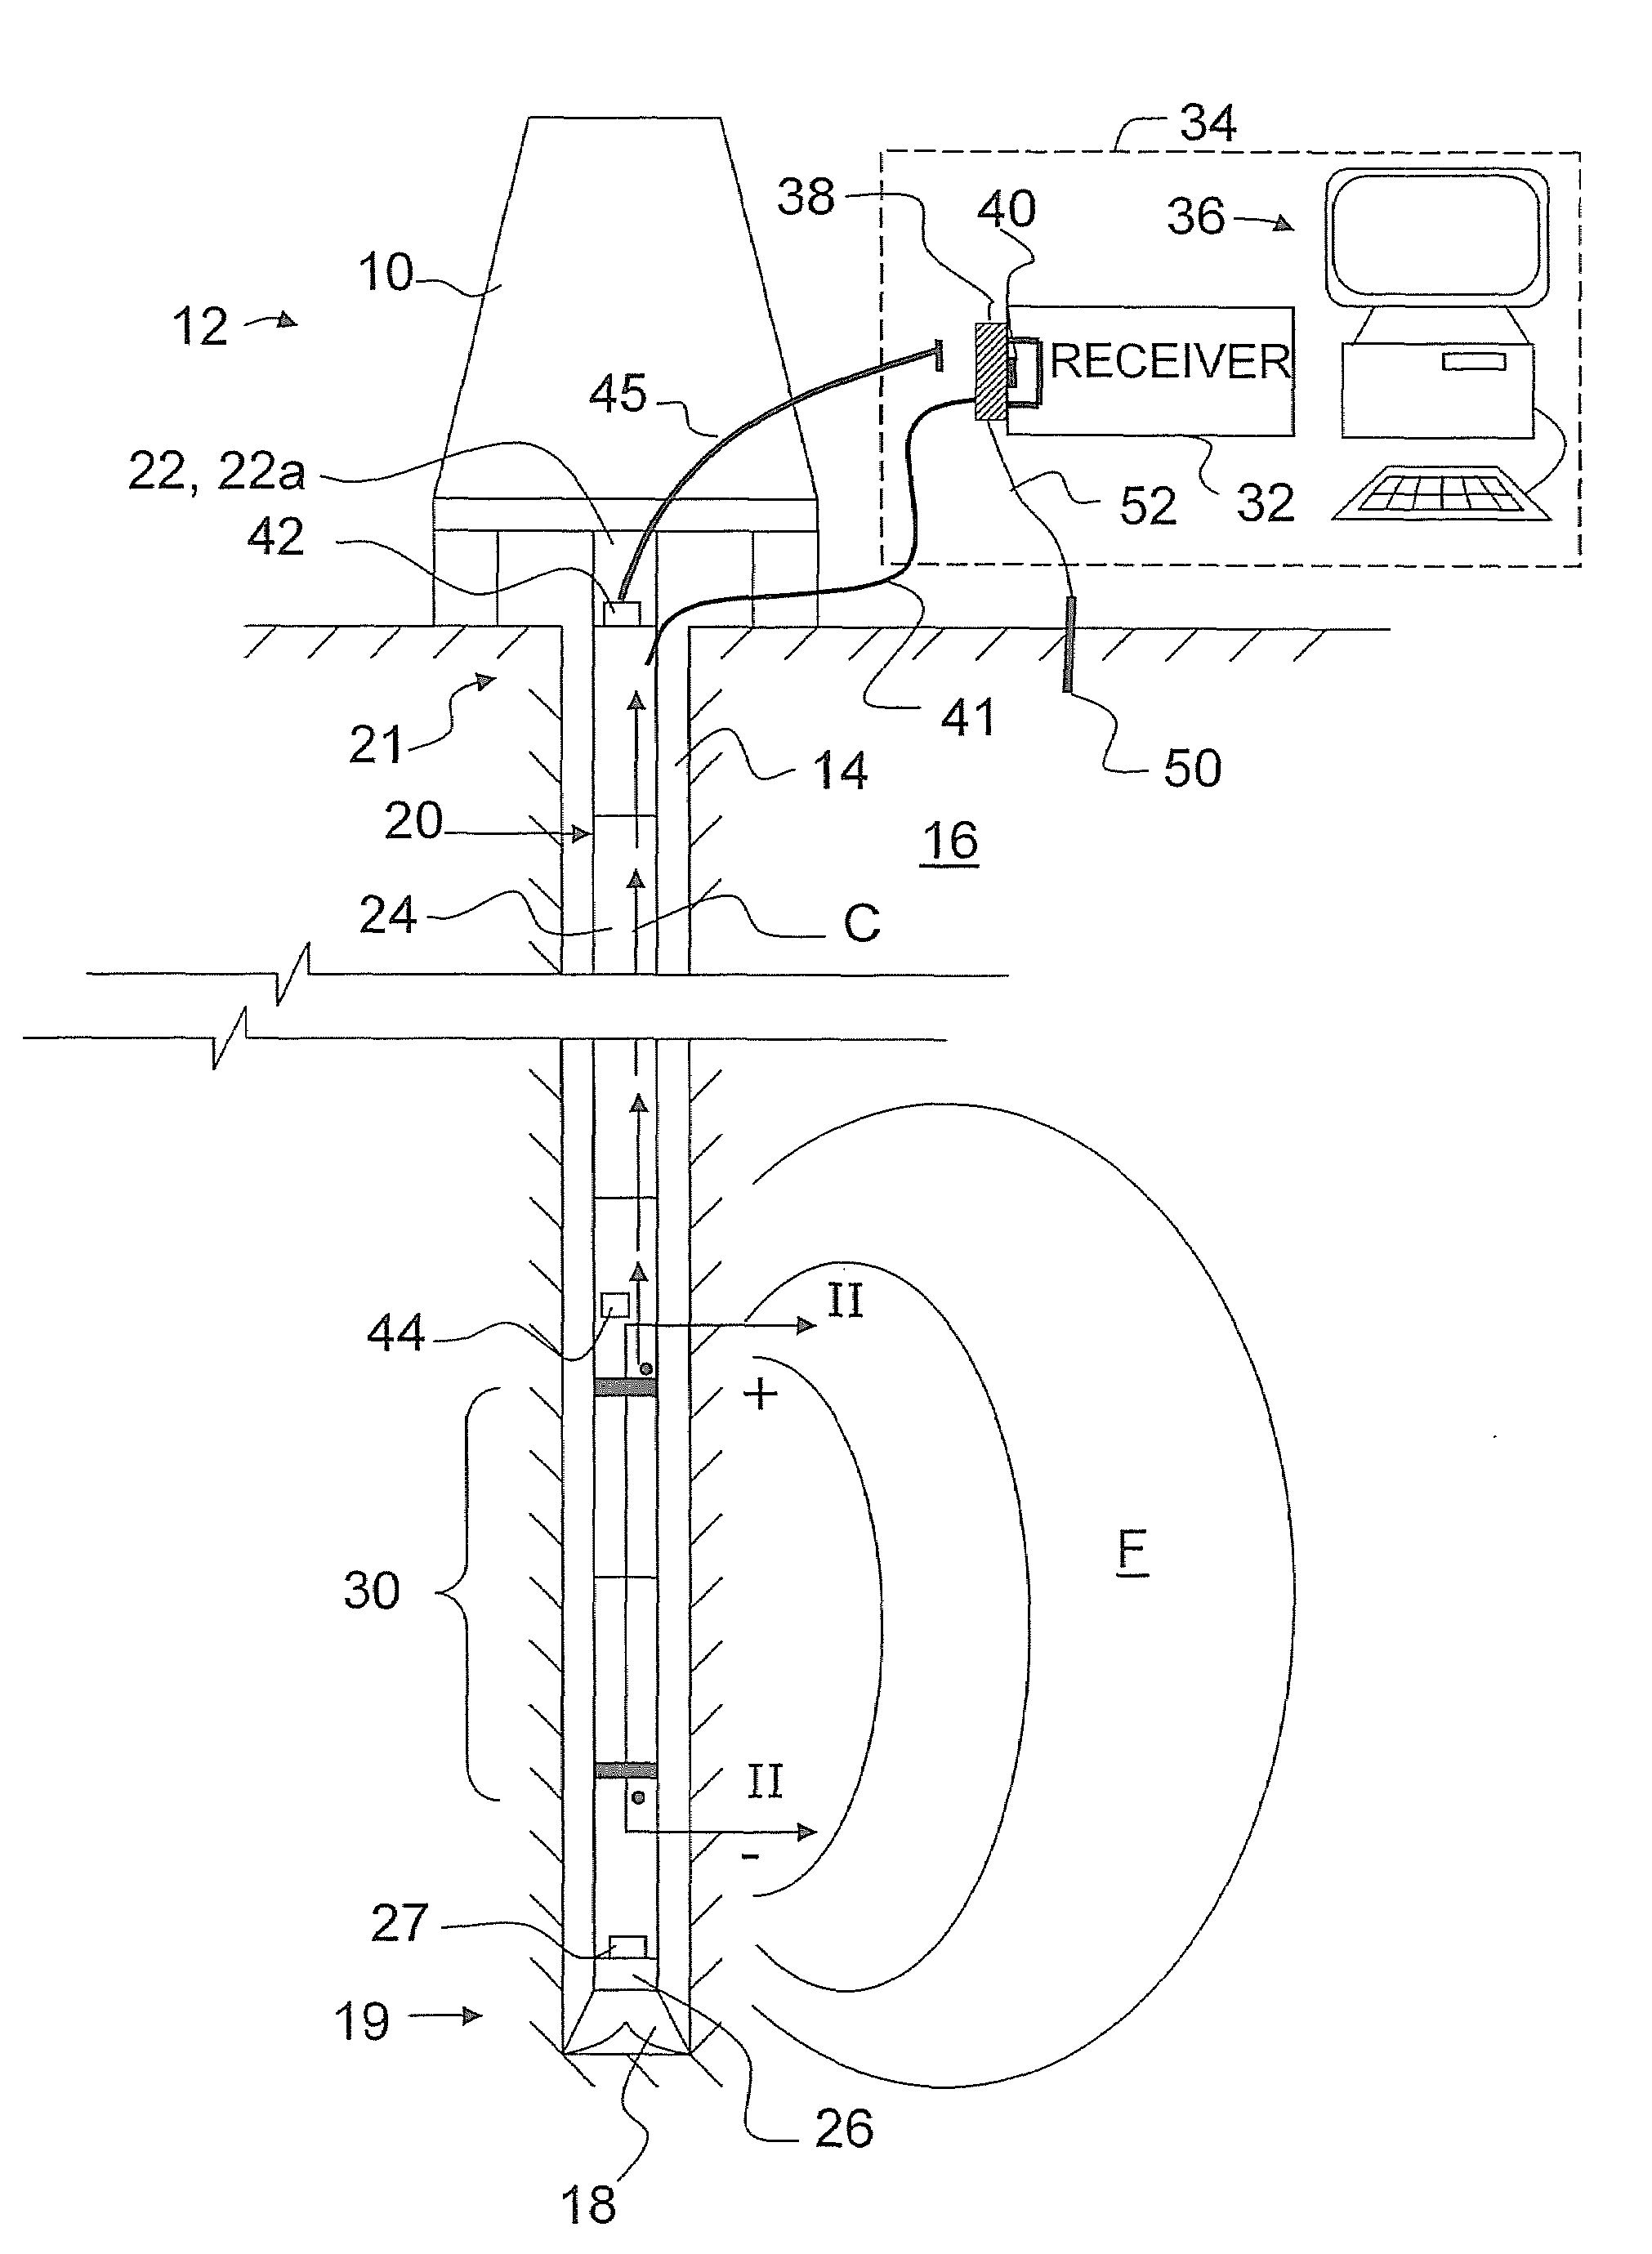 System and method for downhole telemetry